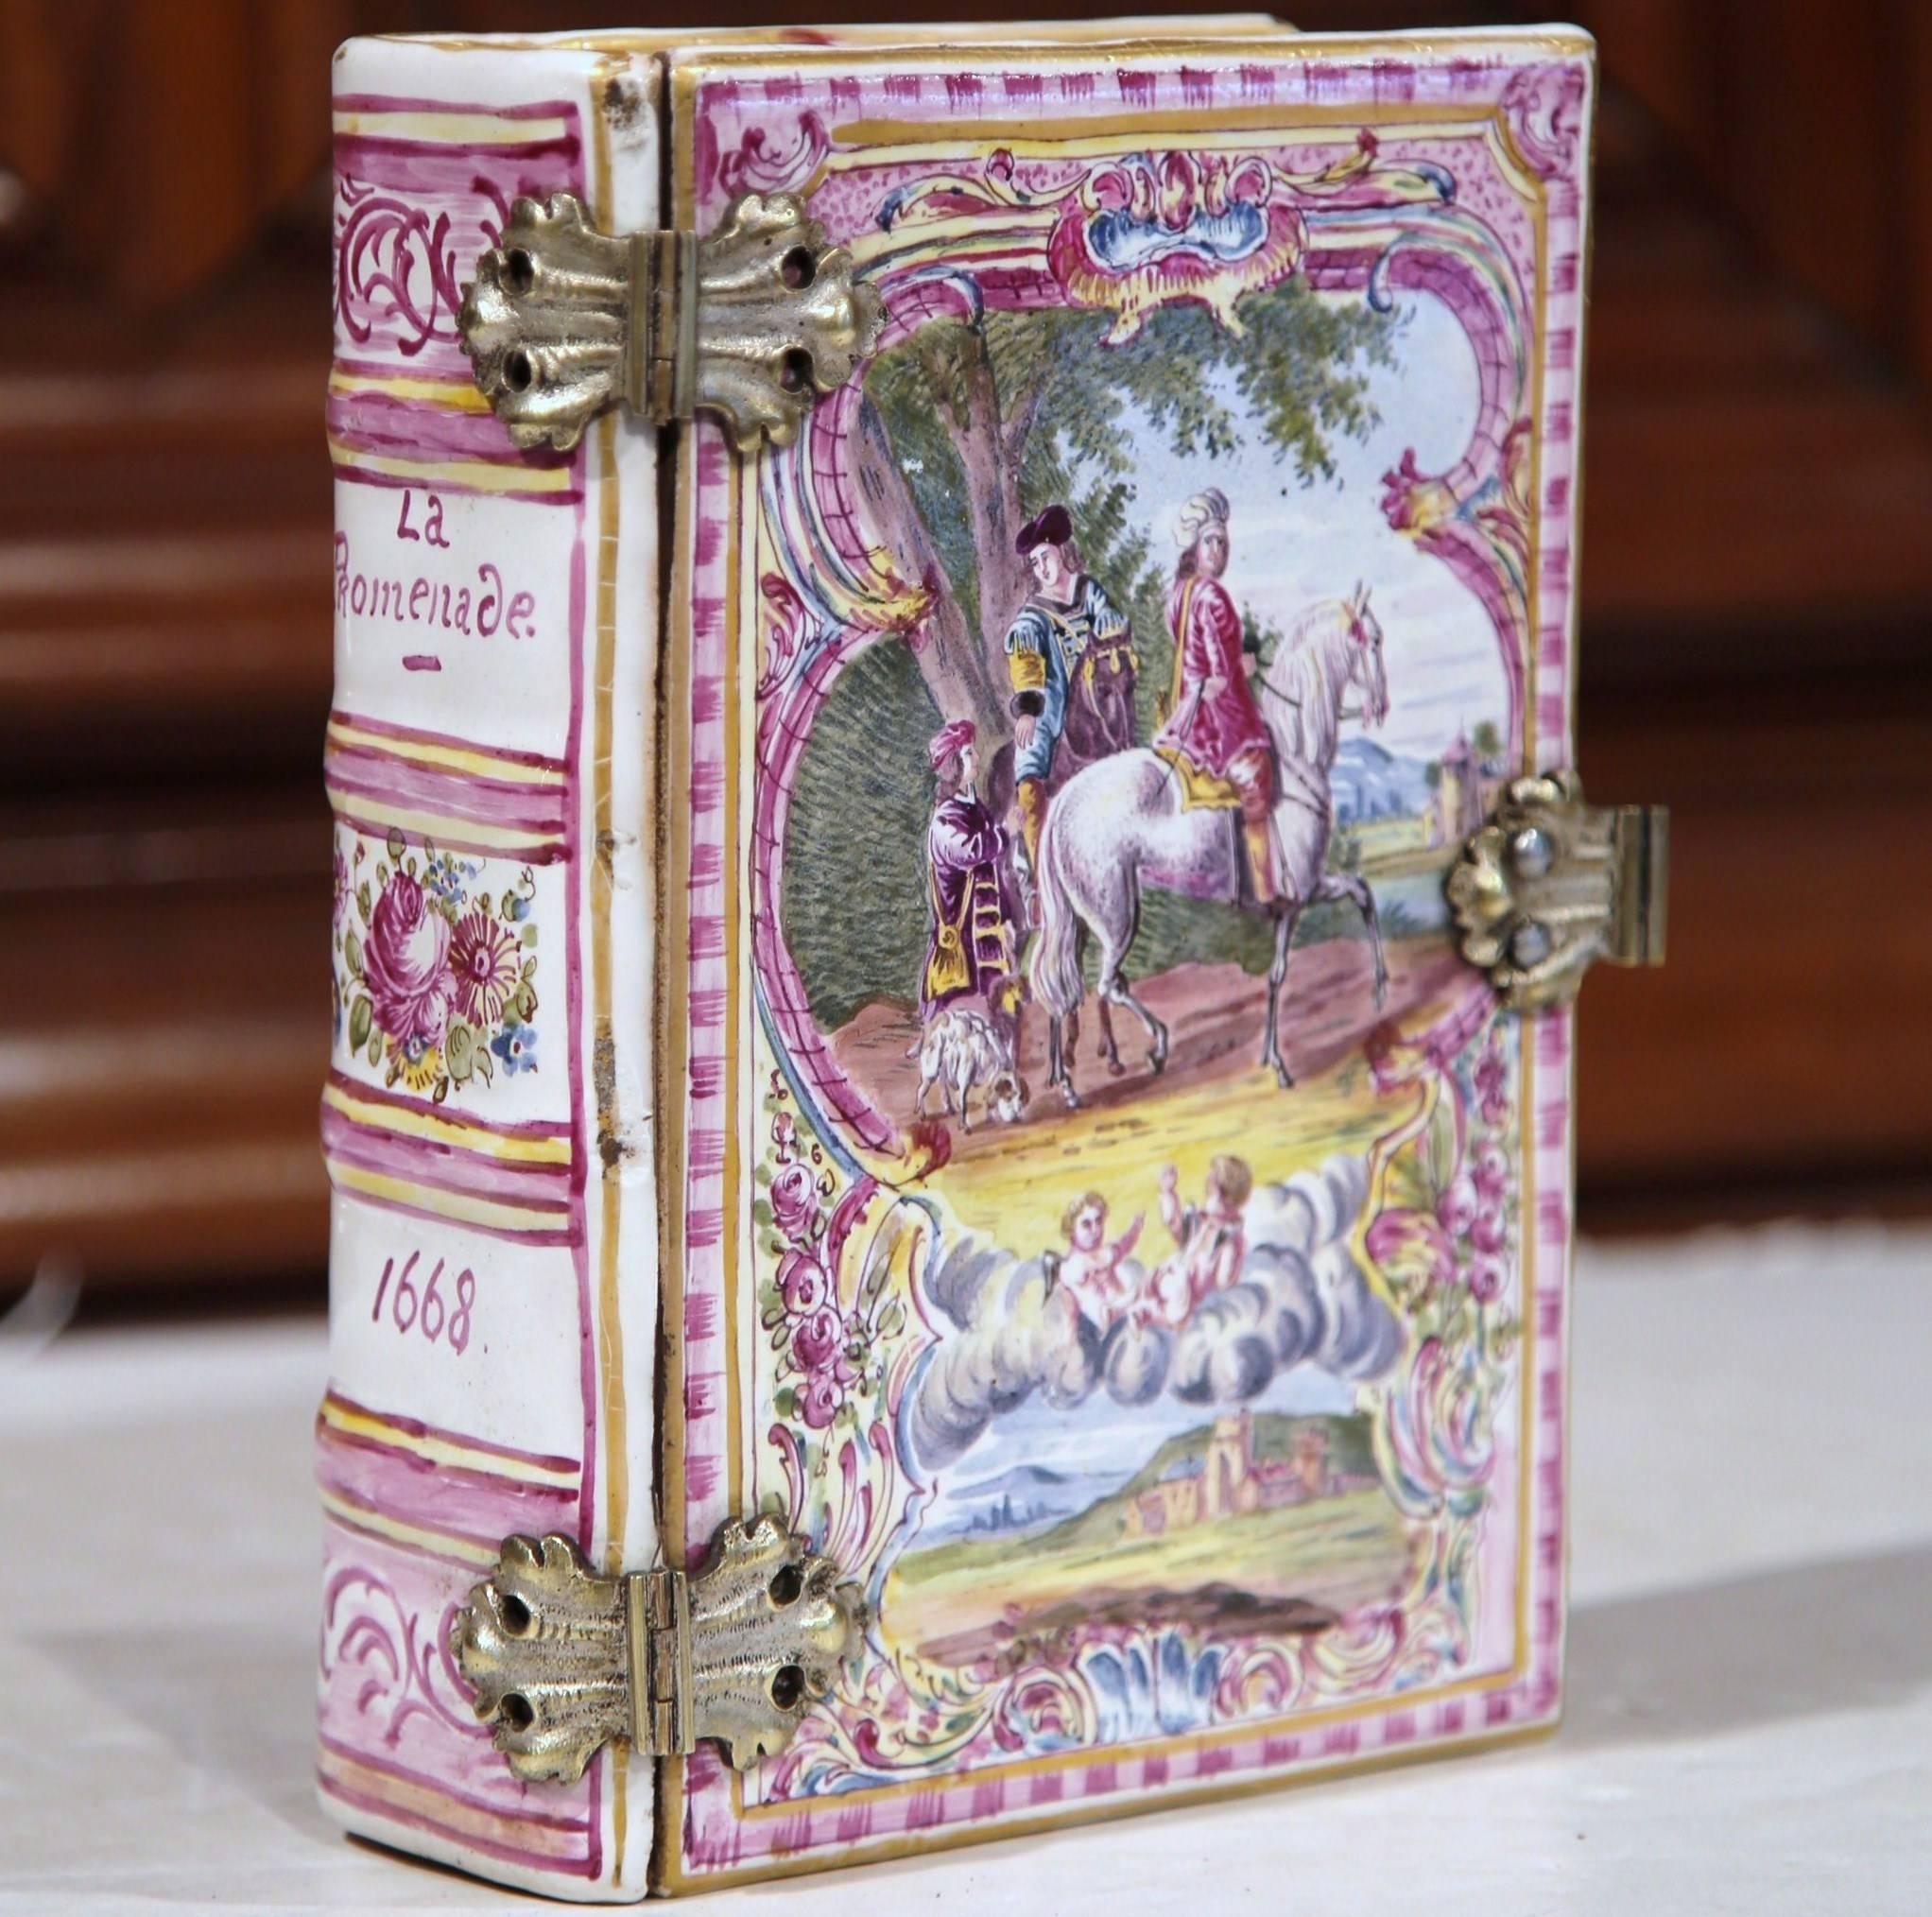 This unique antique decorative porcelain box was sculpted in Paris, circa 1840. The ceramic book is called La Promenade and dated 1668 on the spine. The outside of the jewelry box features exquisite painted Renaissance figures, scenes and landscapes